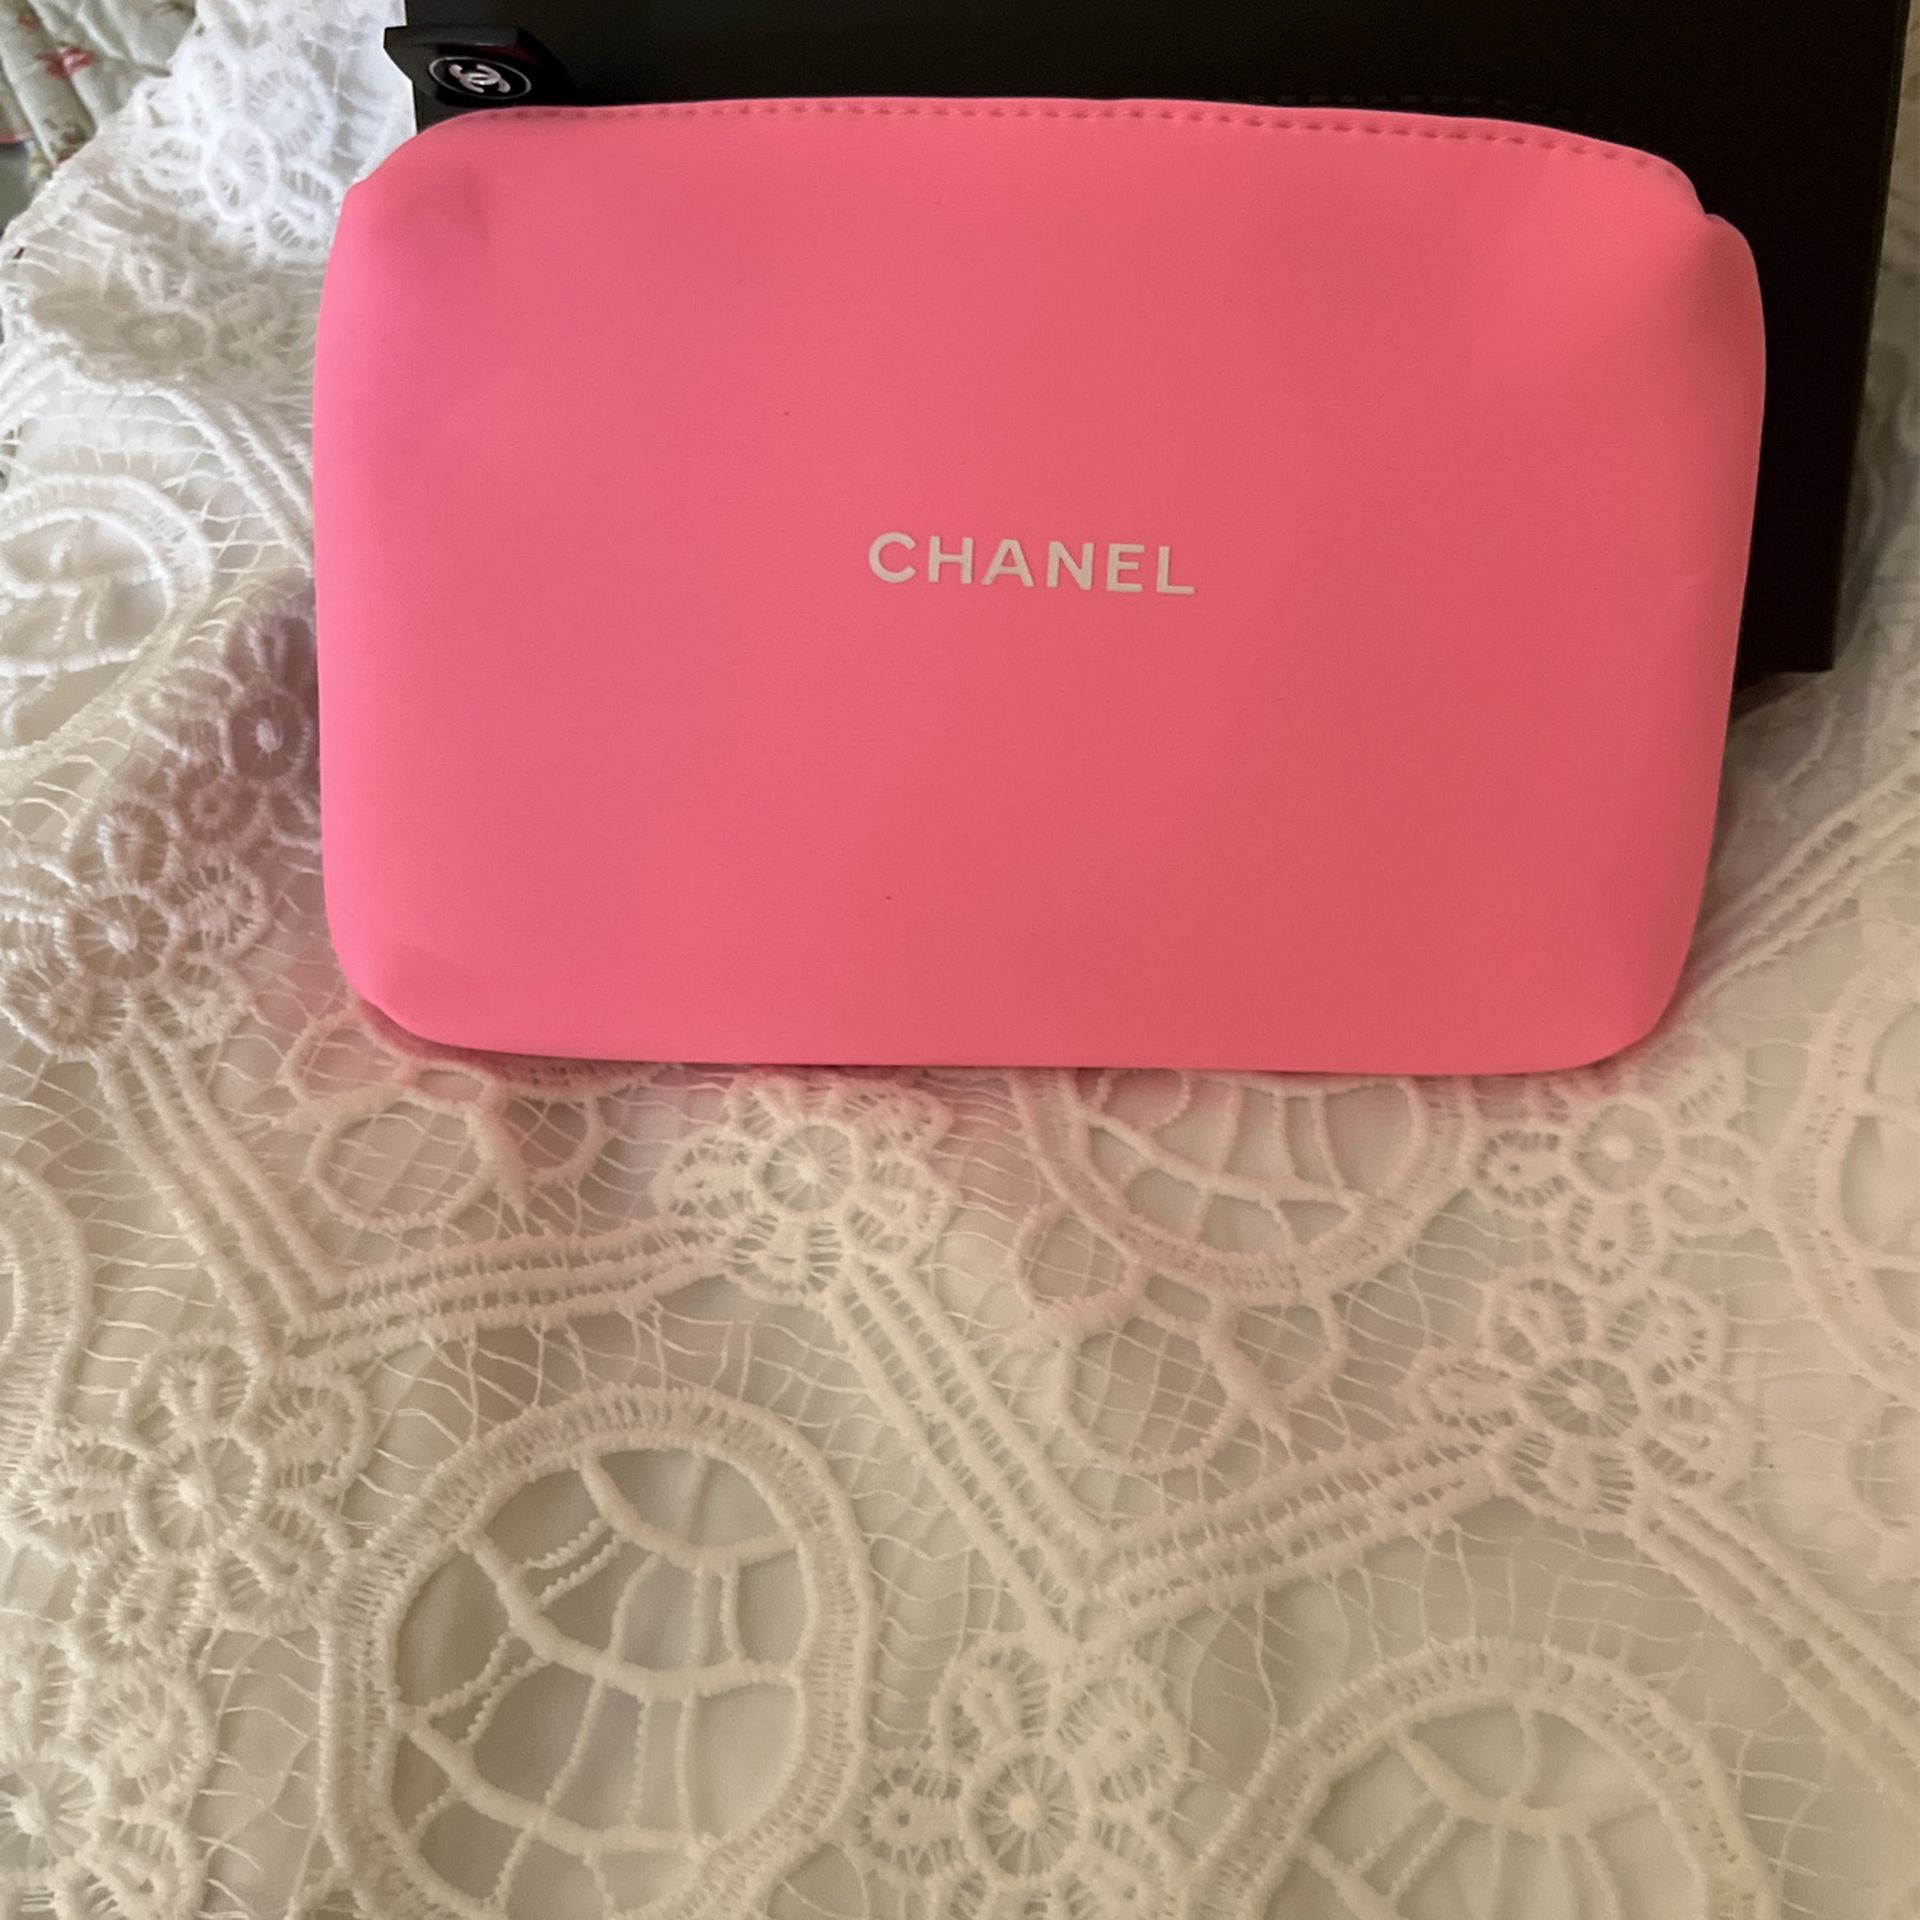 Travel / Cosmetics Bag - 3 For $10 for Sale in Brooklyn, NY - OfferUp